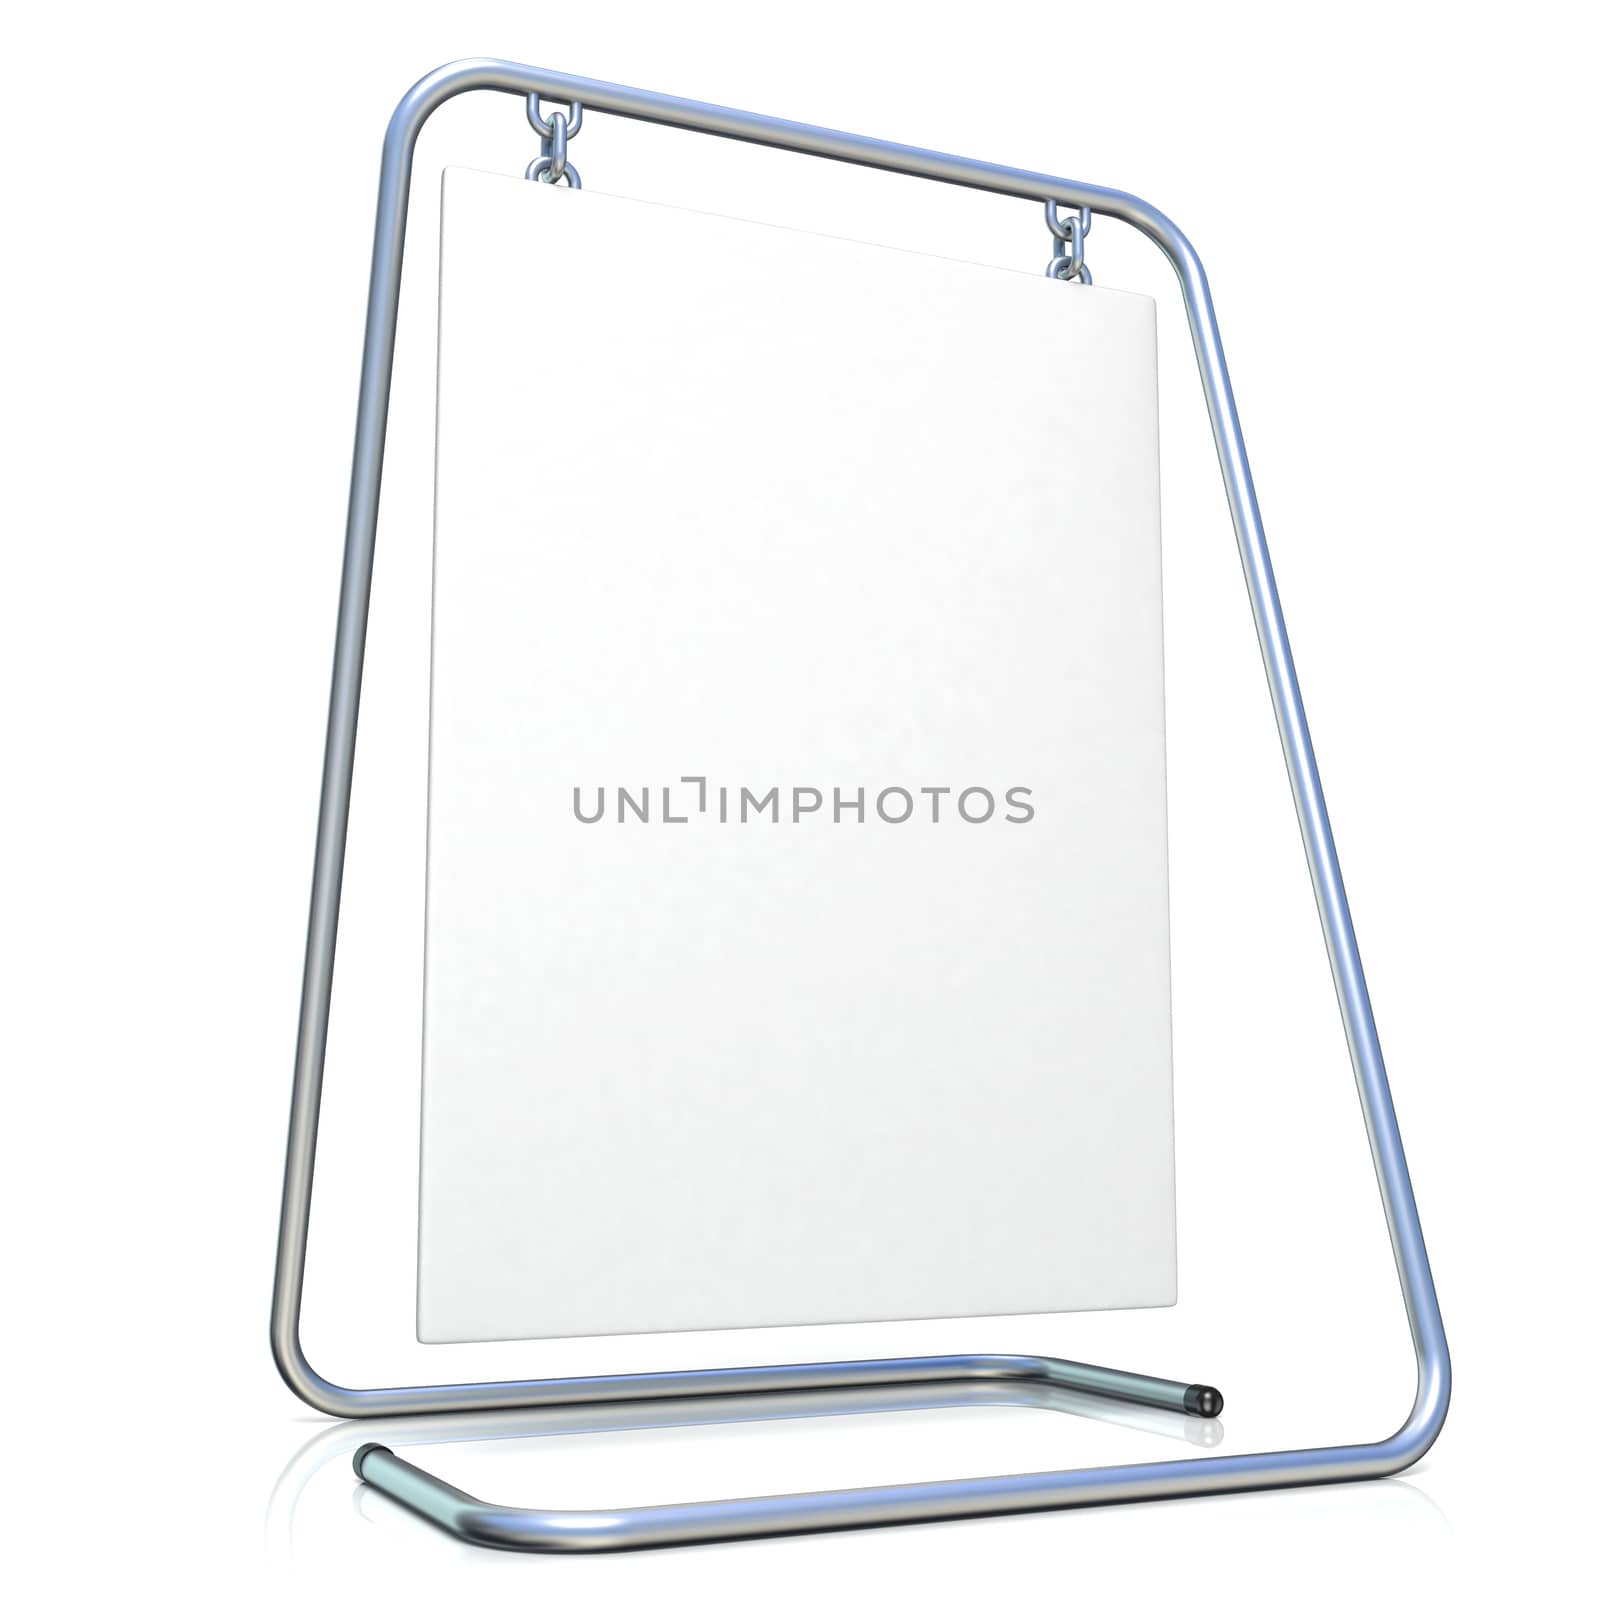 Metal advertising stand, with copy space board. Side view. 3D illustration isolated on white background